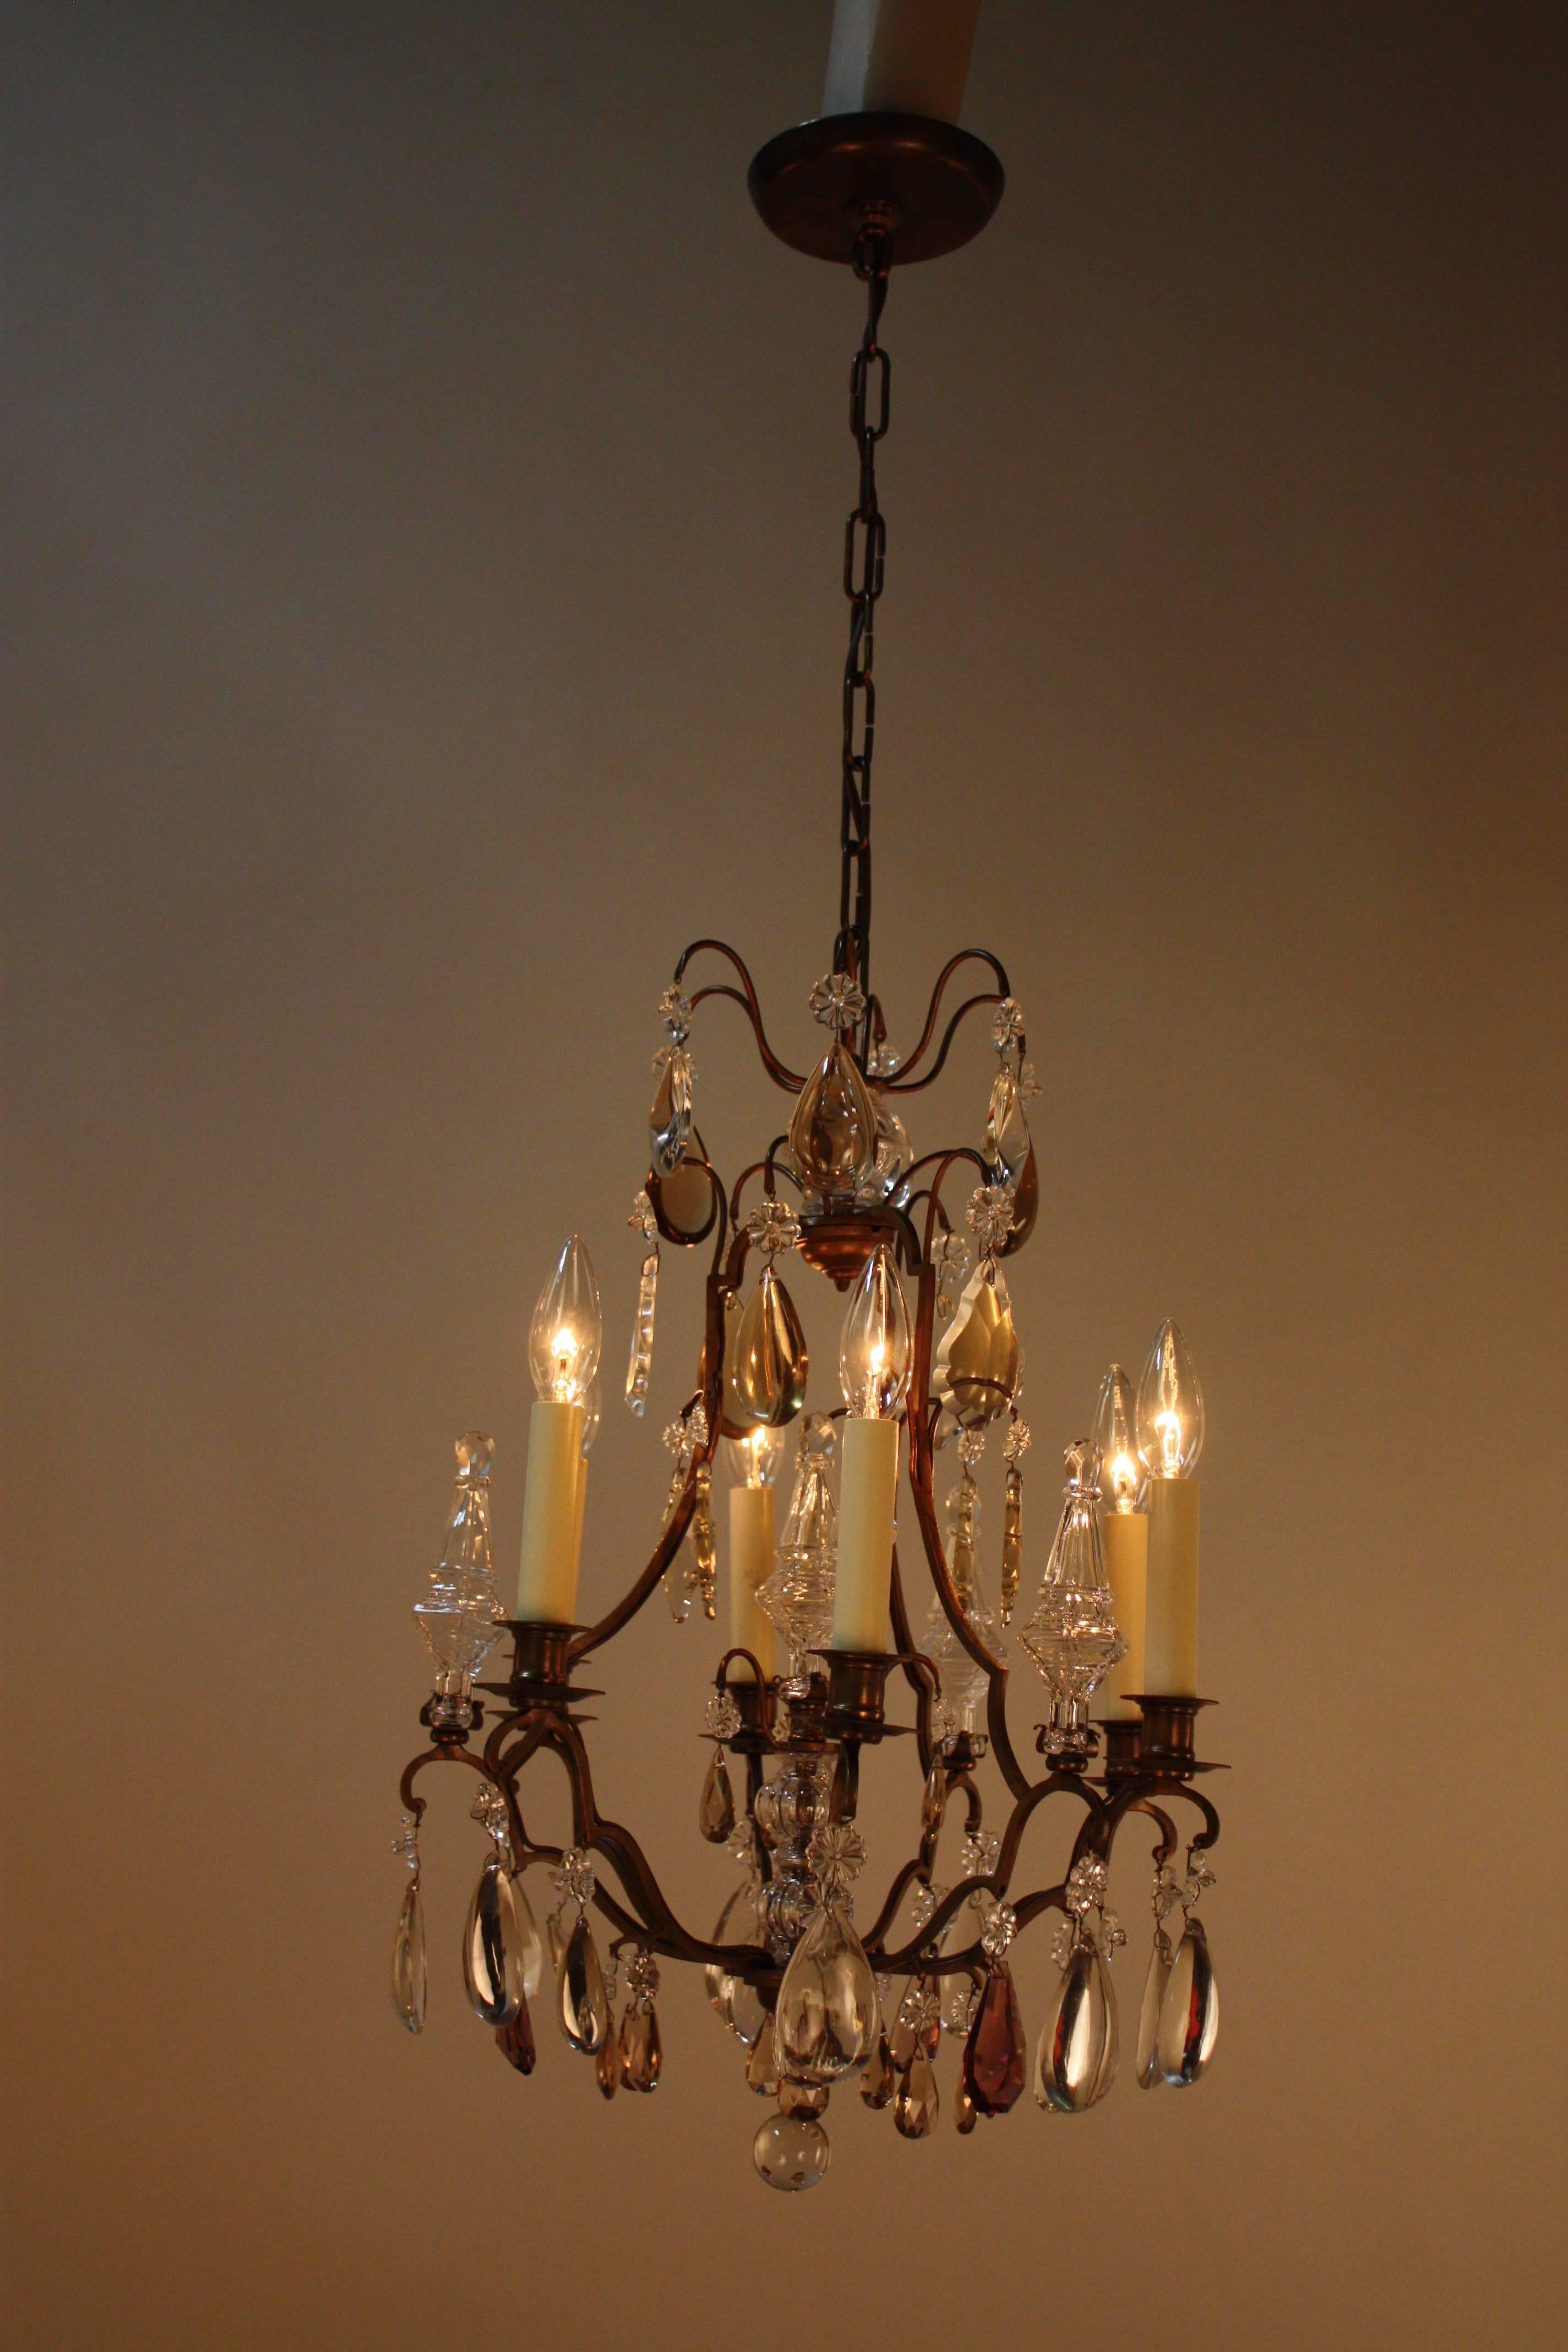 Elegant six-light crystal chandelier with beautiful bronze frame.
Fully installed height 24